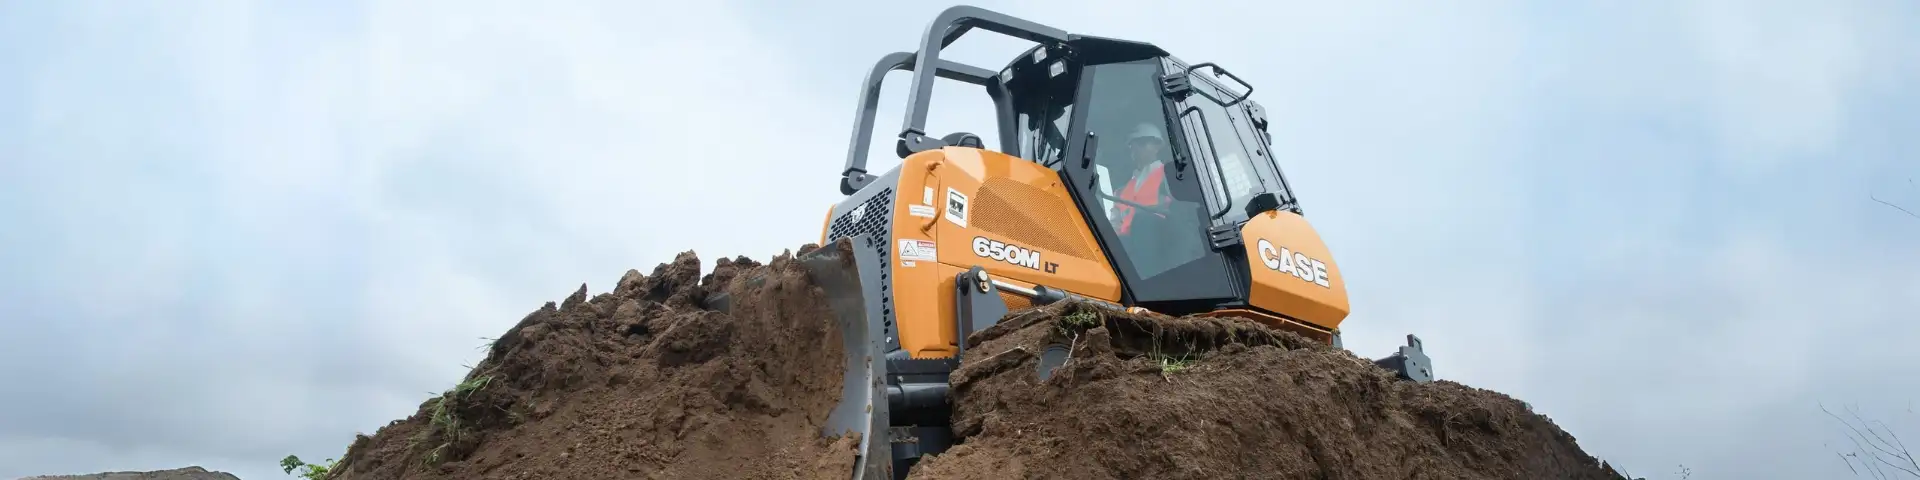 Lease offer on CASE Dozers